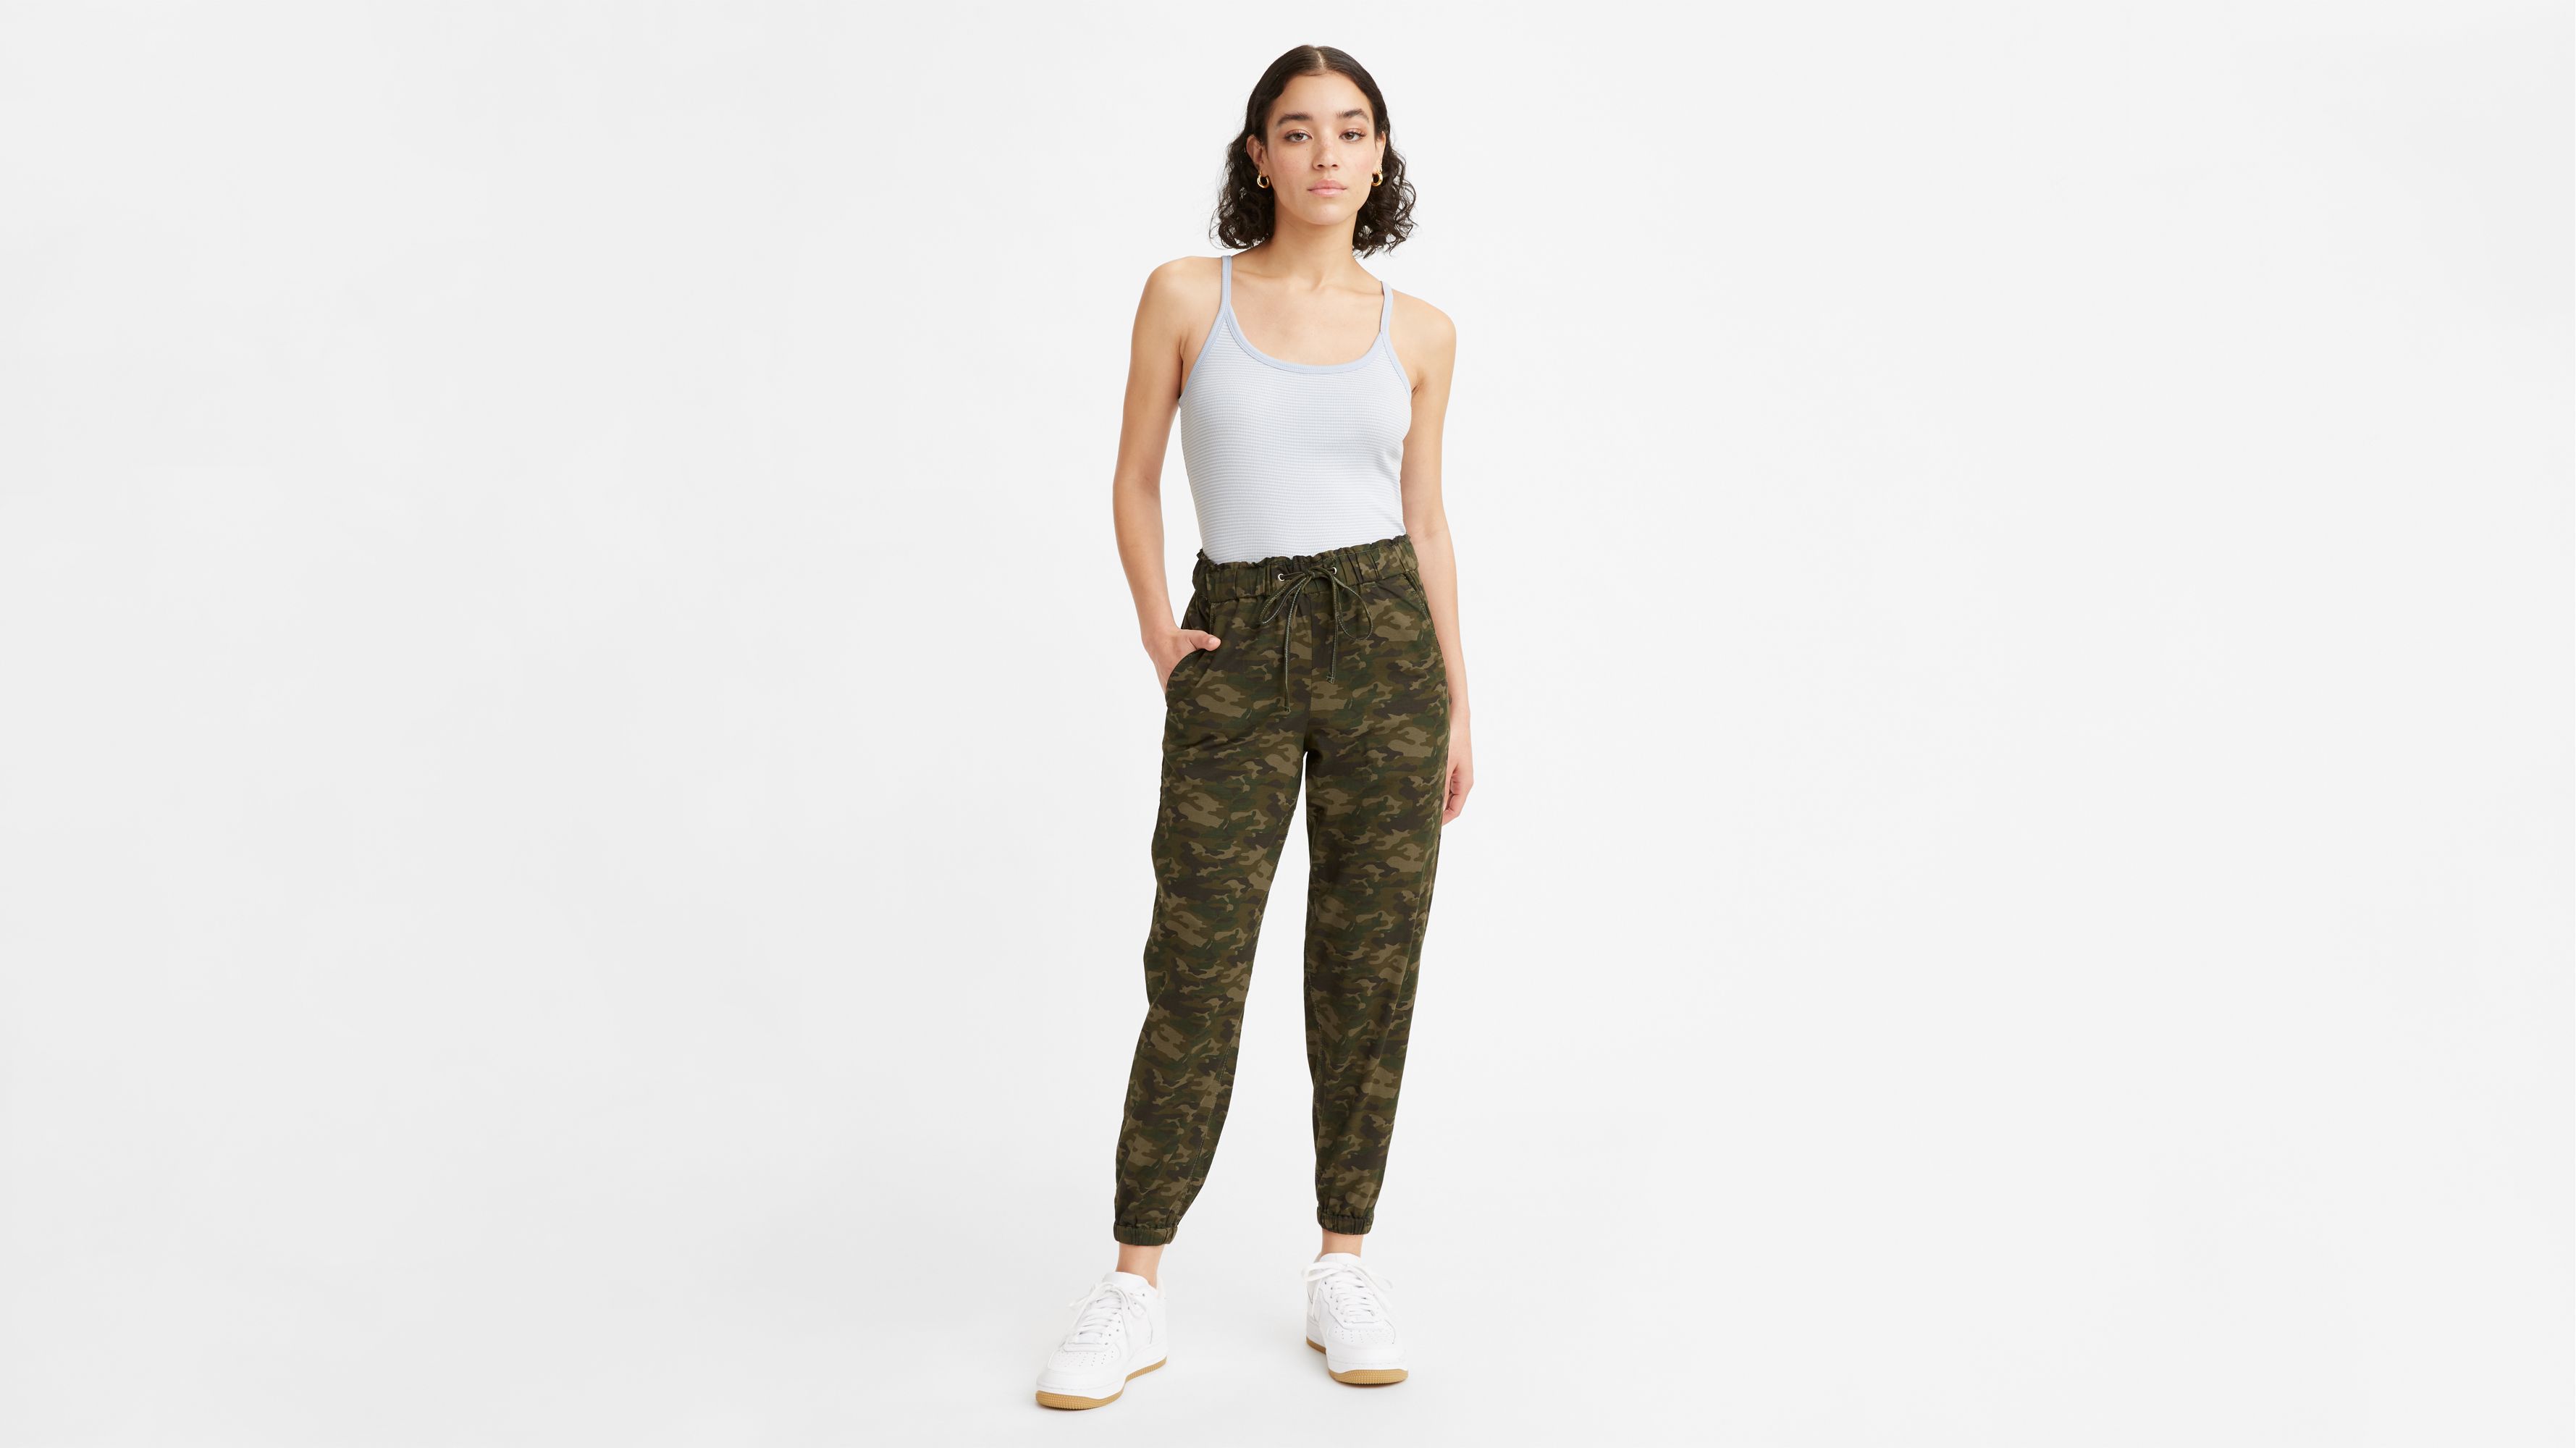 Levi's Women's Off-Duty High Rise Relaxed Jogger Pants - Macy's